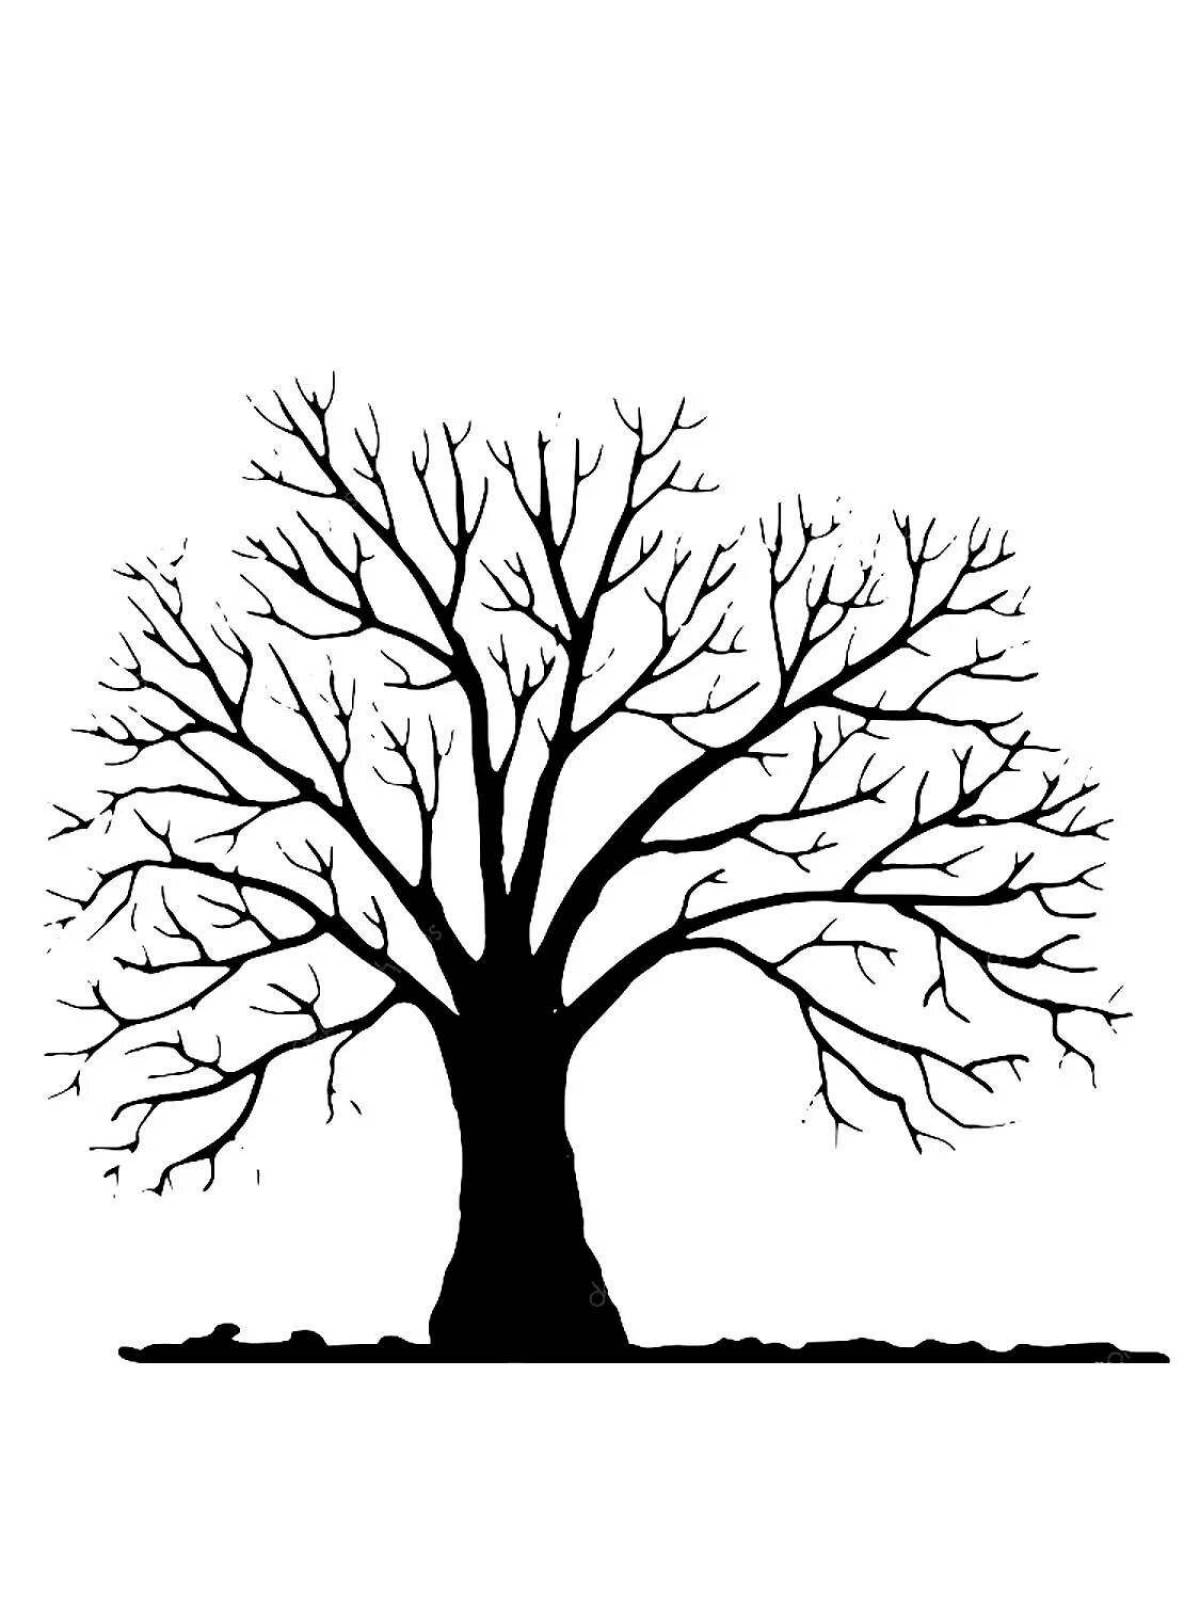 Playful drawing of a sprawling tree